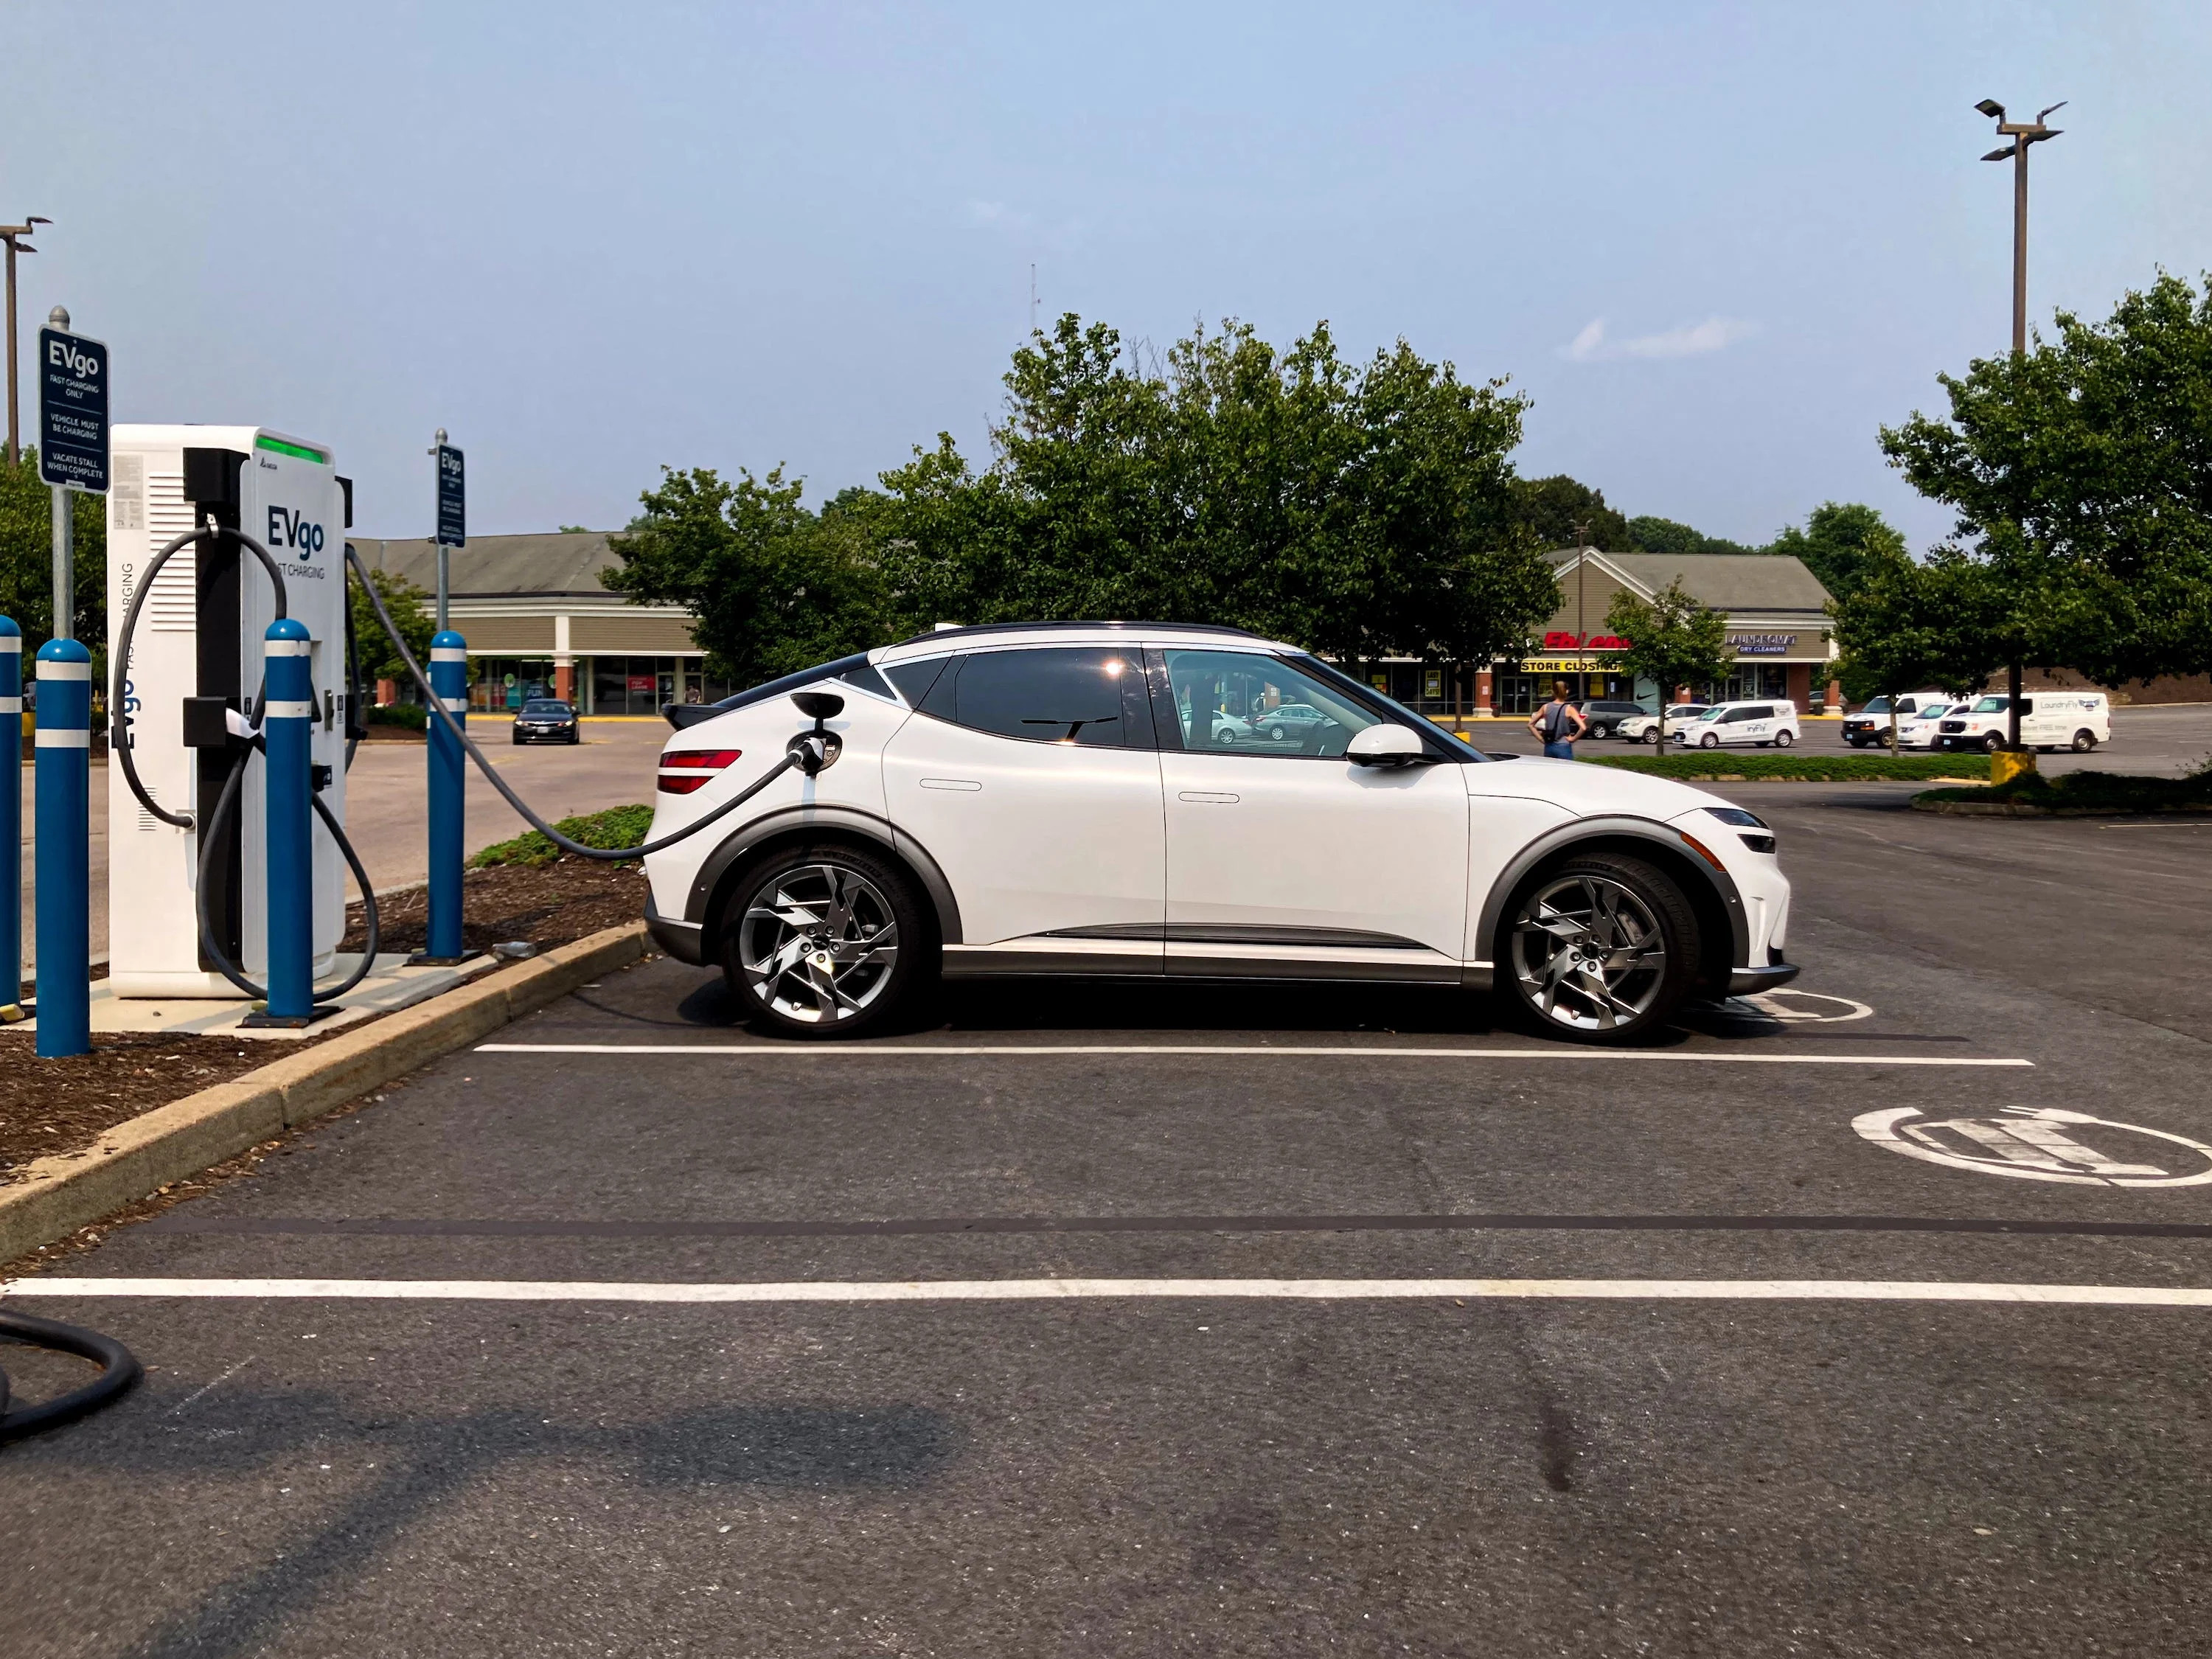 A white Genesis GV60 electric SUV charging at an EVgo station, with trees and sky in the background.